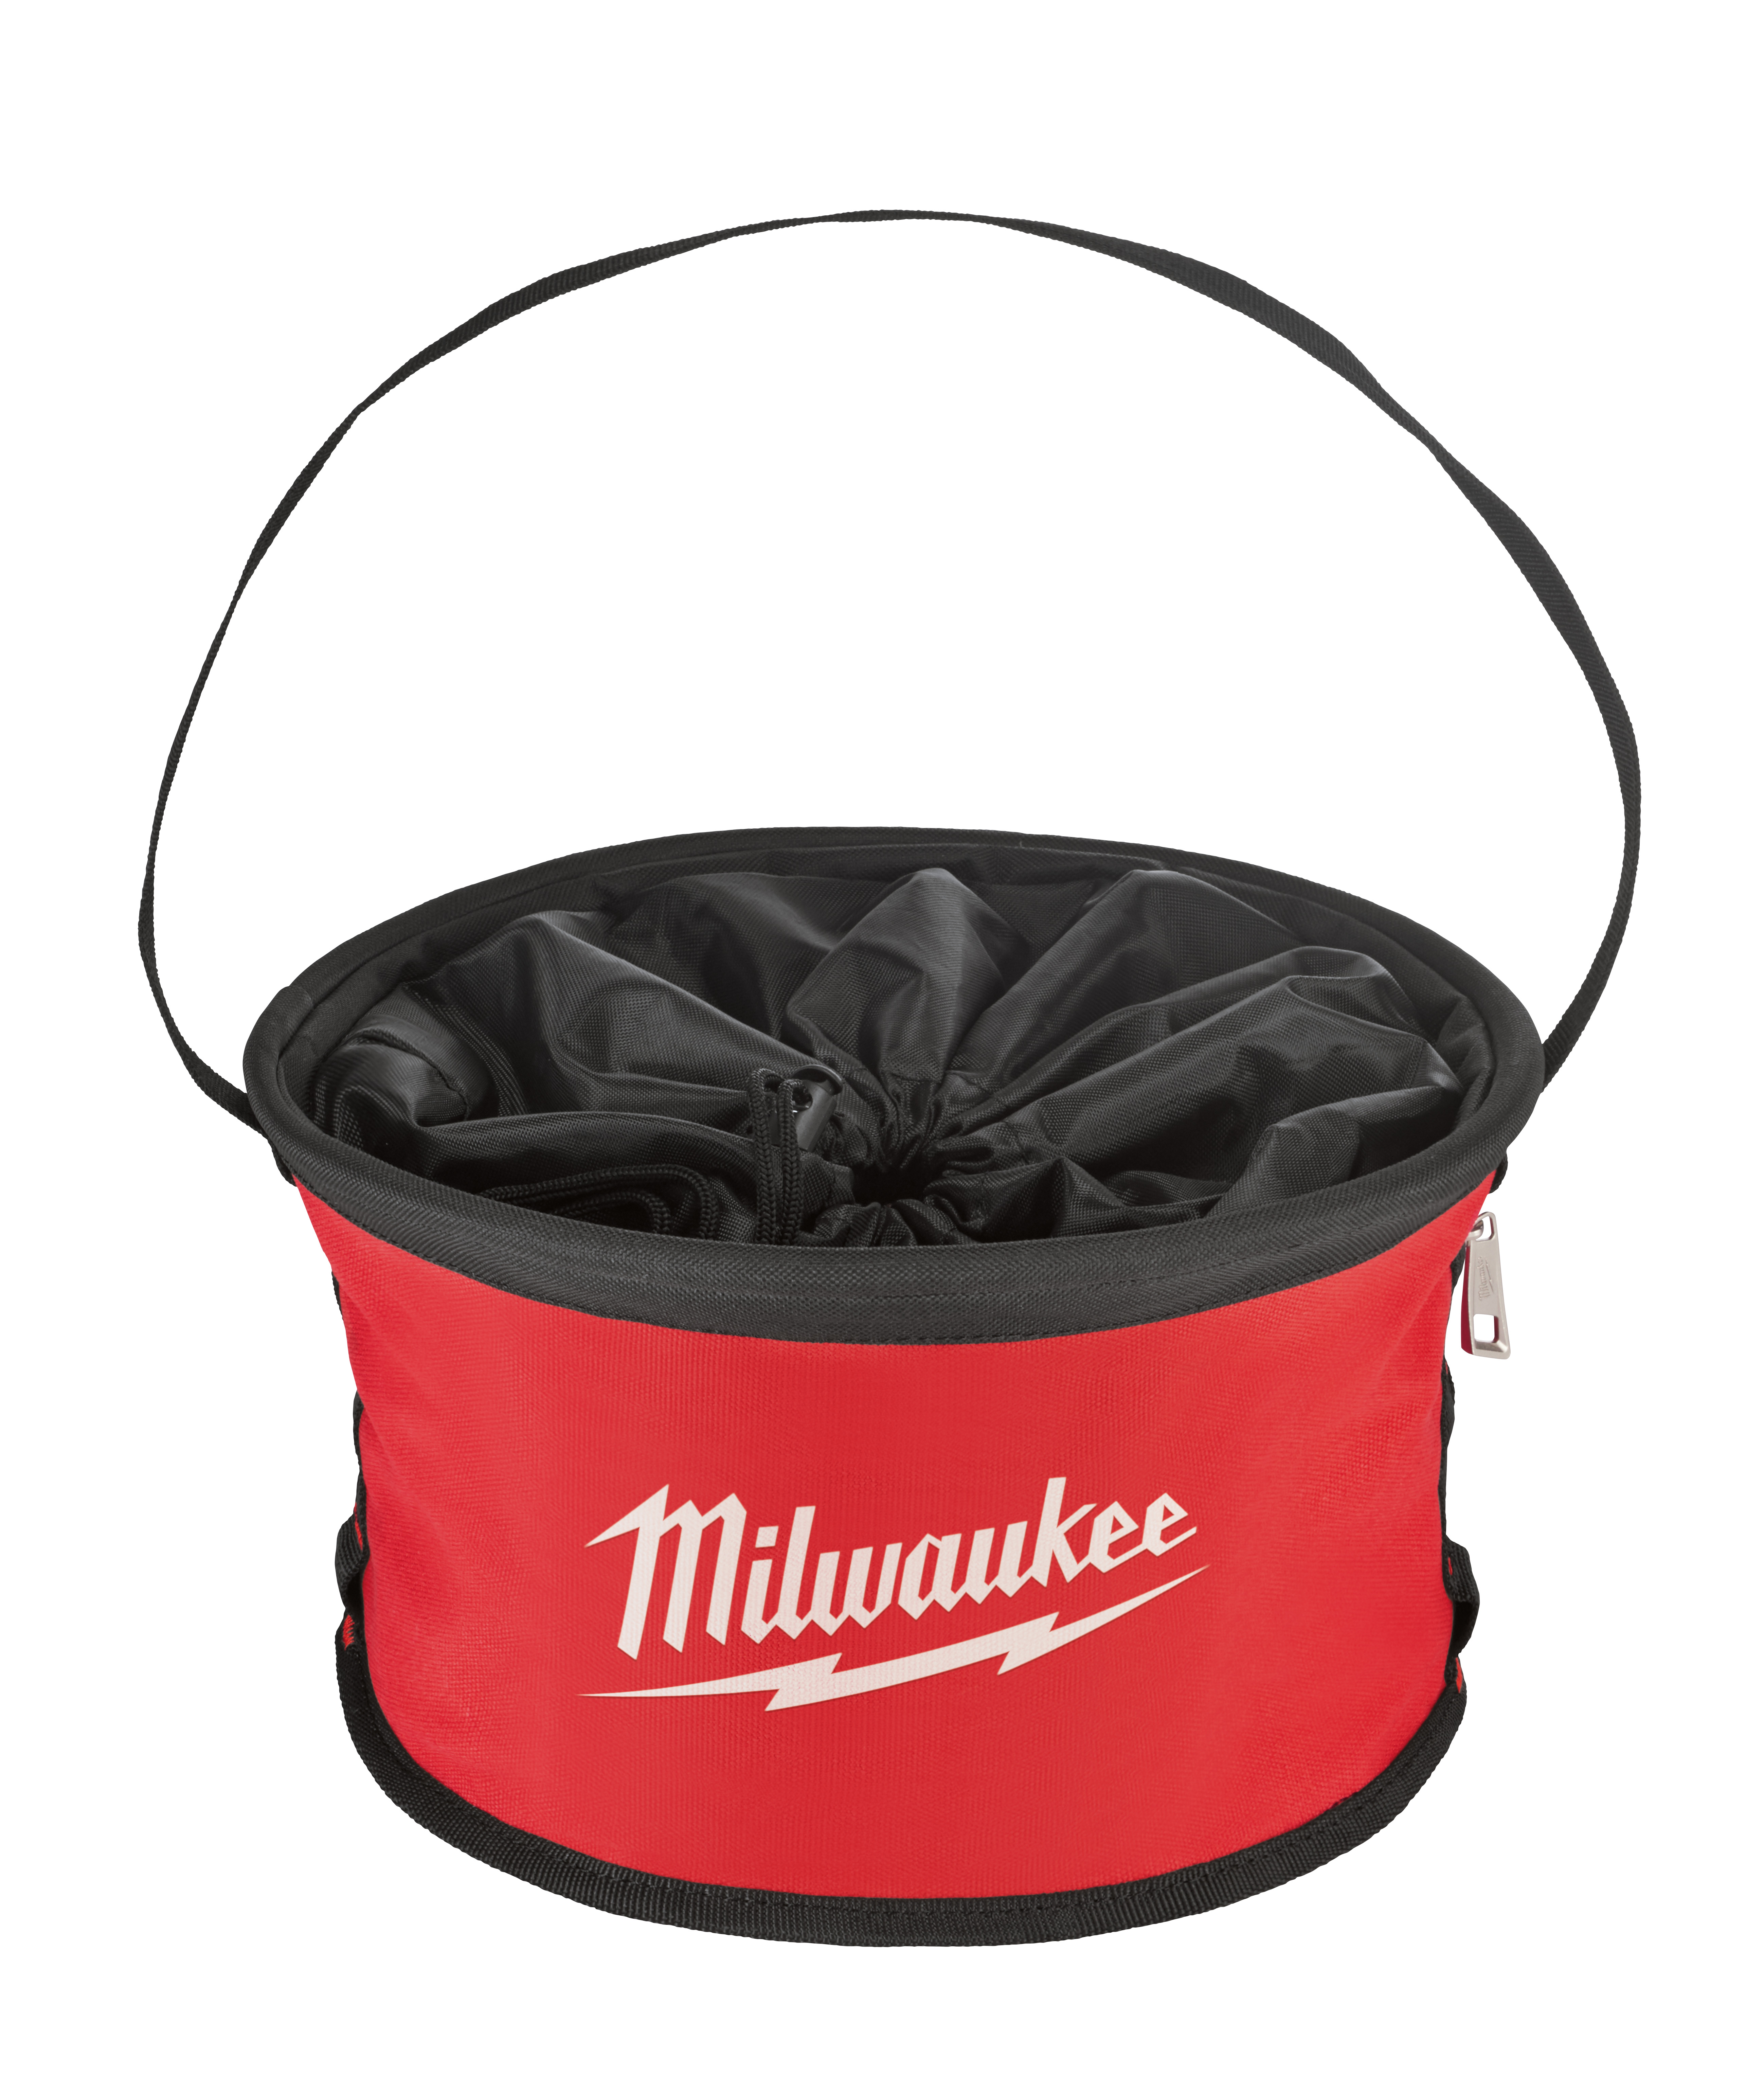 The Milwaukee parachute organizer bag was designed to provide the fastest access and is built with the best construction. Featuring a stand up, stay open design, the organizer bag allows for full access to the bags contents, even when suspended from the handle. Designed with 6 interior compartments, 2 exterior pockets, and an exterior zipper pocket, the Milwaukee parachute organizer bag provides the ultimate storage solution for small fasteners and fittings. Built with a reinforced, tear resistant 1680D ballistic material base and heavy duty canvas, the Milwaukee parachute organizer bag confirms Milwaukee's commitment to providing innovative, durable storage solutions.